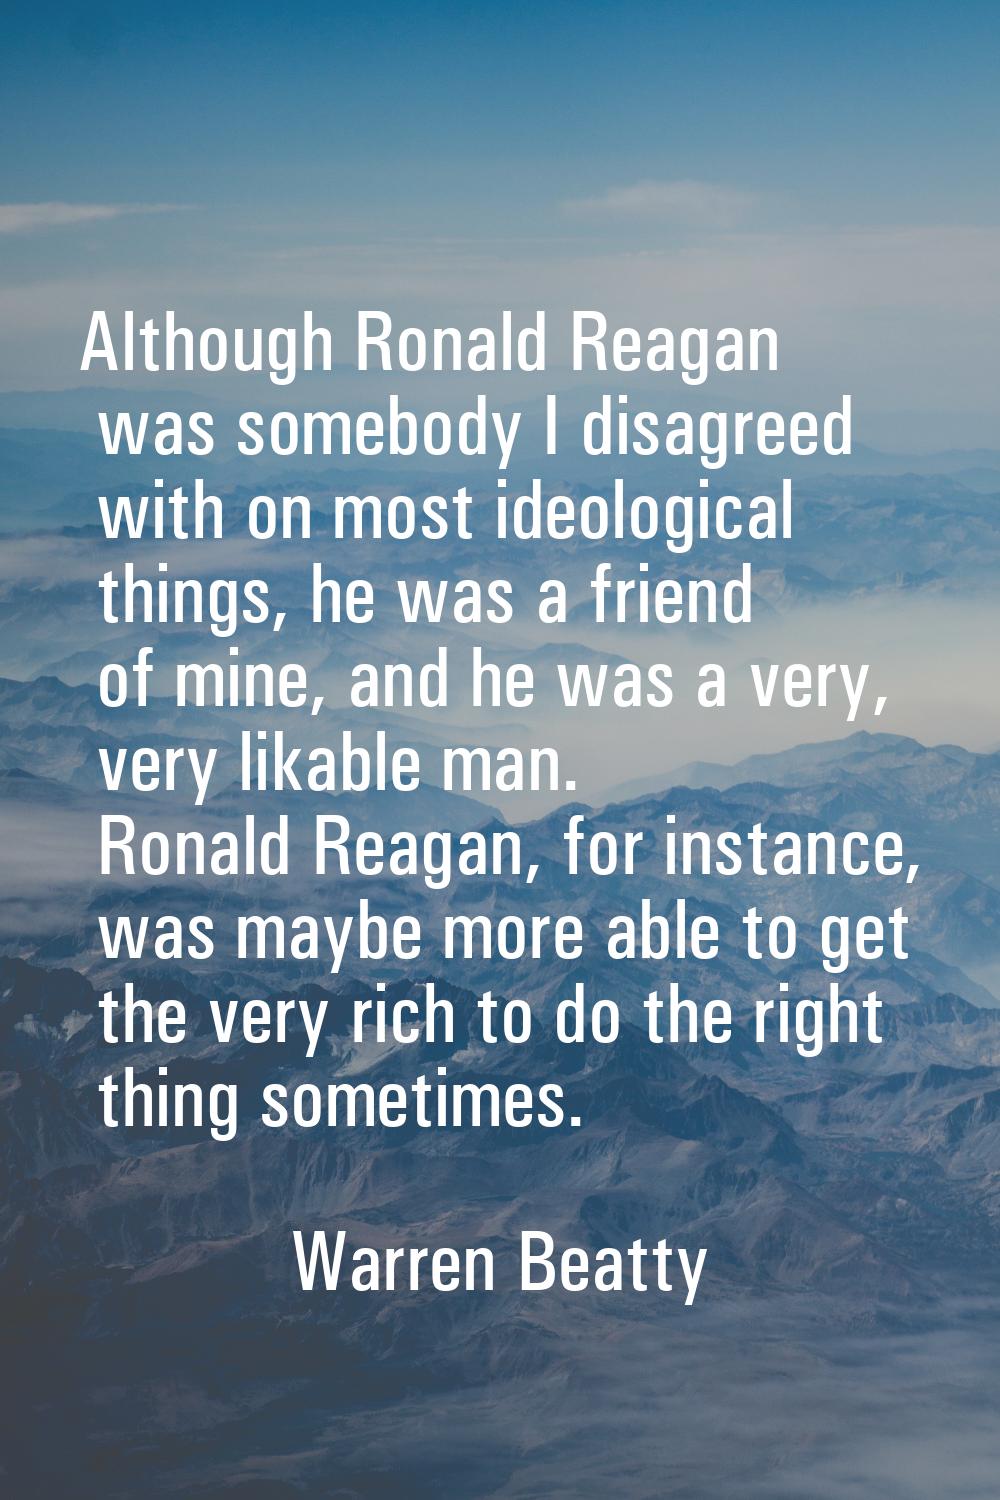 Although Ronald Reagan was somebody I disagreed with on most ideological things, he was a friend of